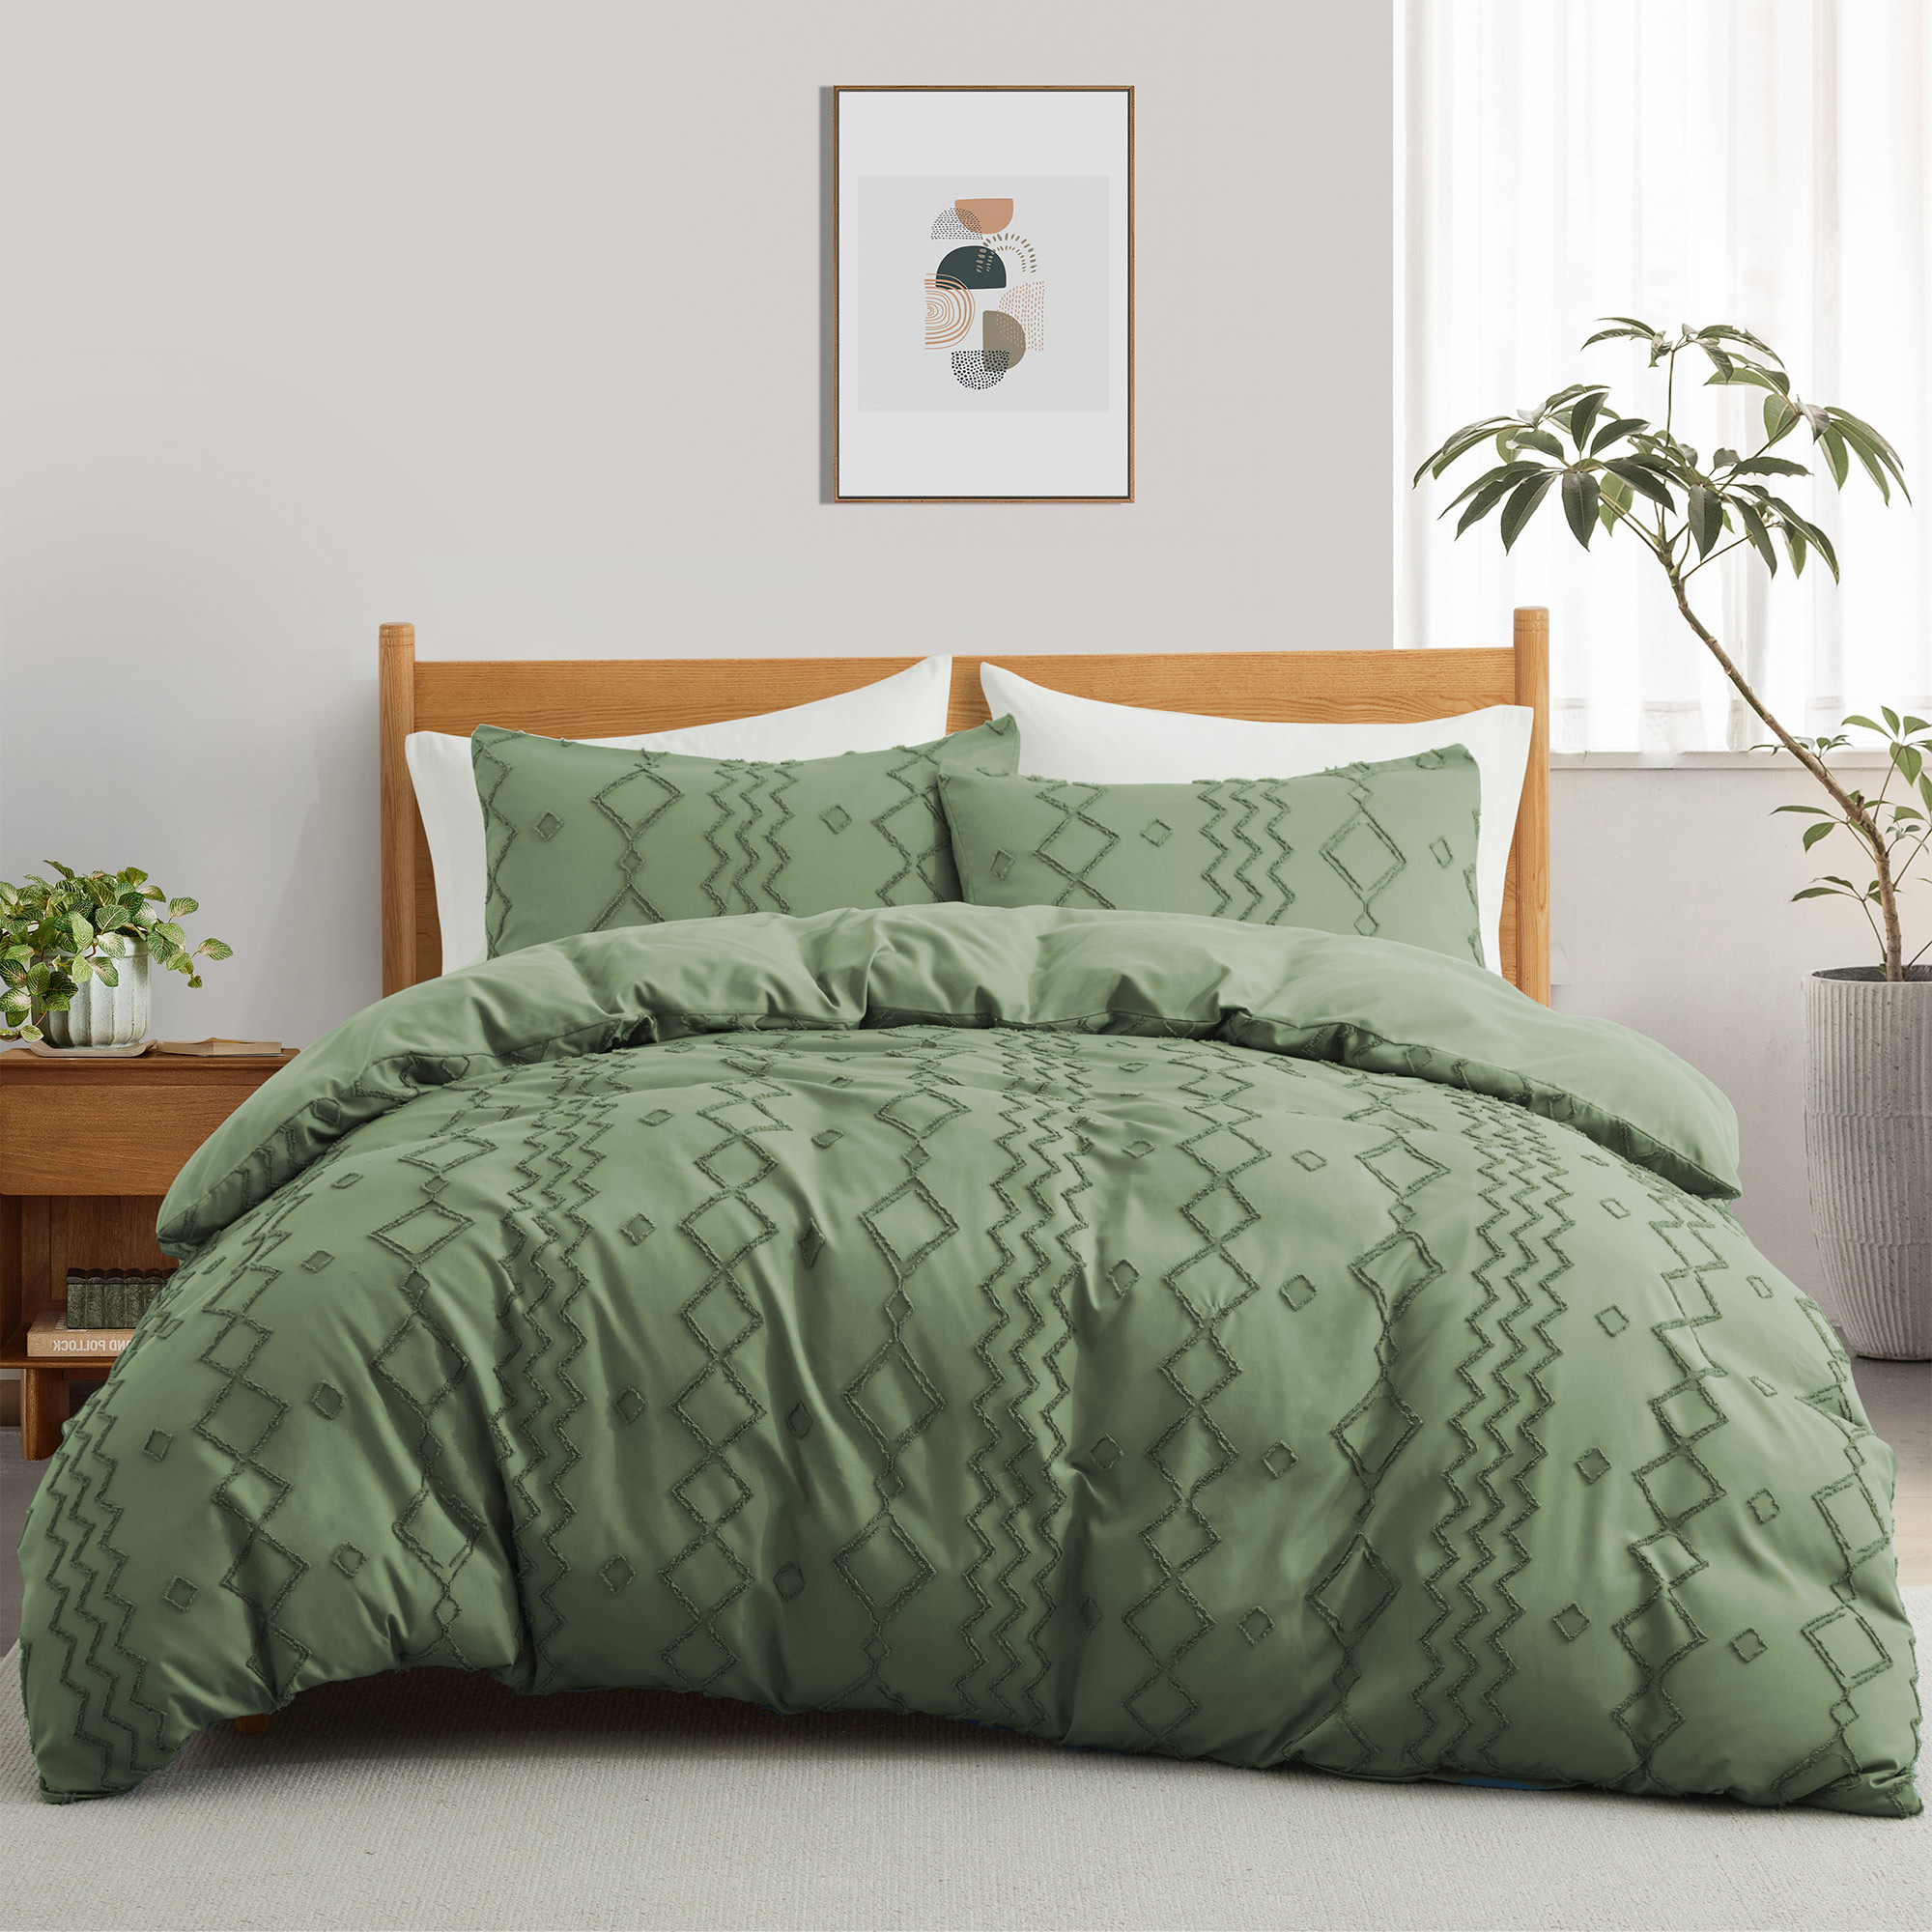 Basic Bedding Sets With All Season Goose Down Feather Comforter, 2 Pack Goose Down Pillows, Duvet Cover Set - Green Bundles Option, Twin Siz